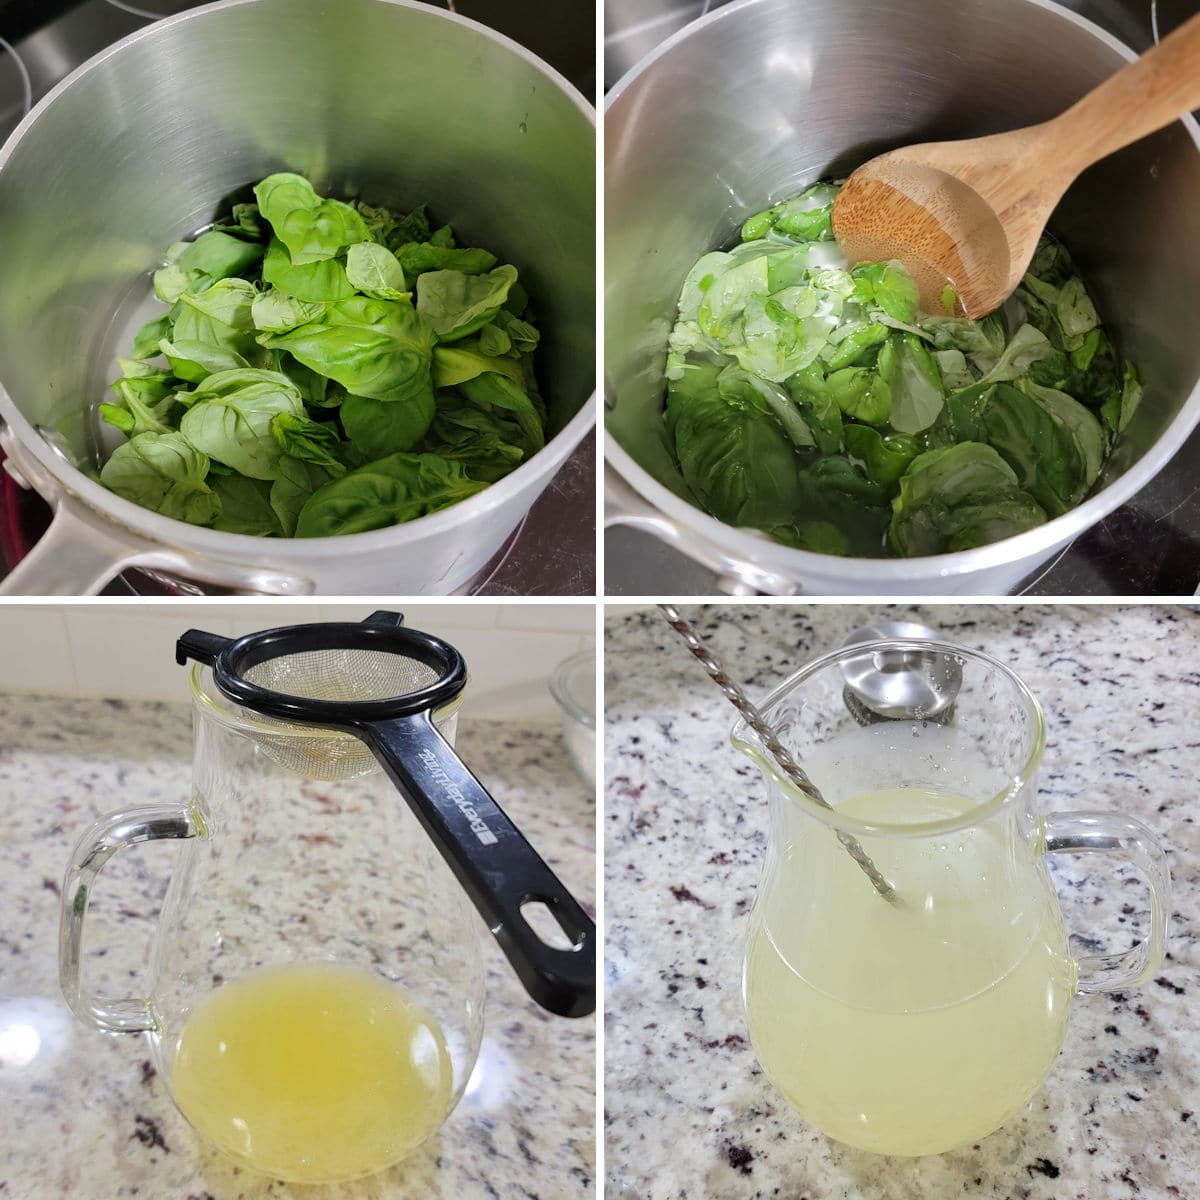 Making basil simple syrup and mixing into lemon juice.